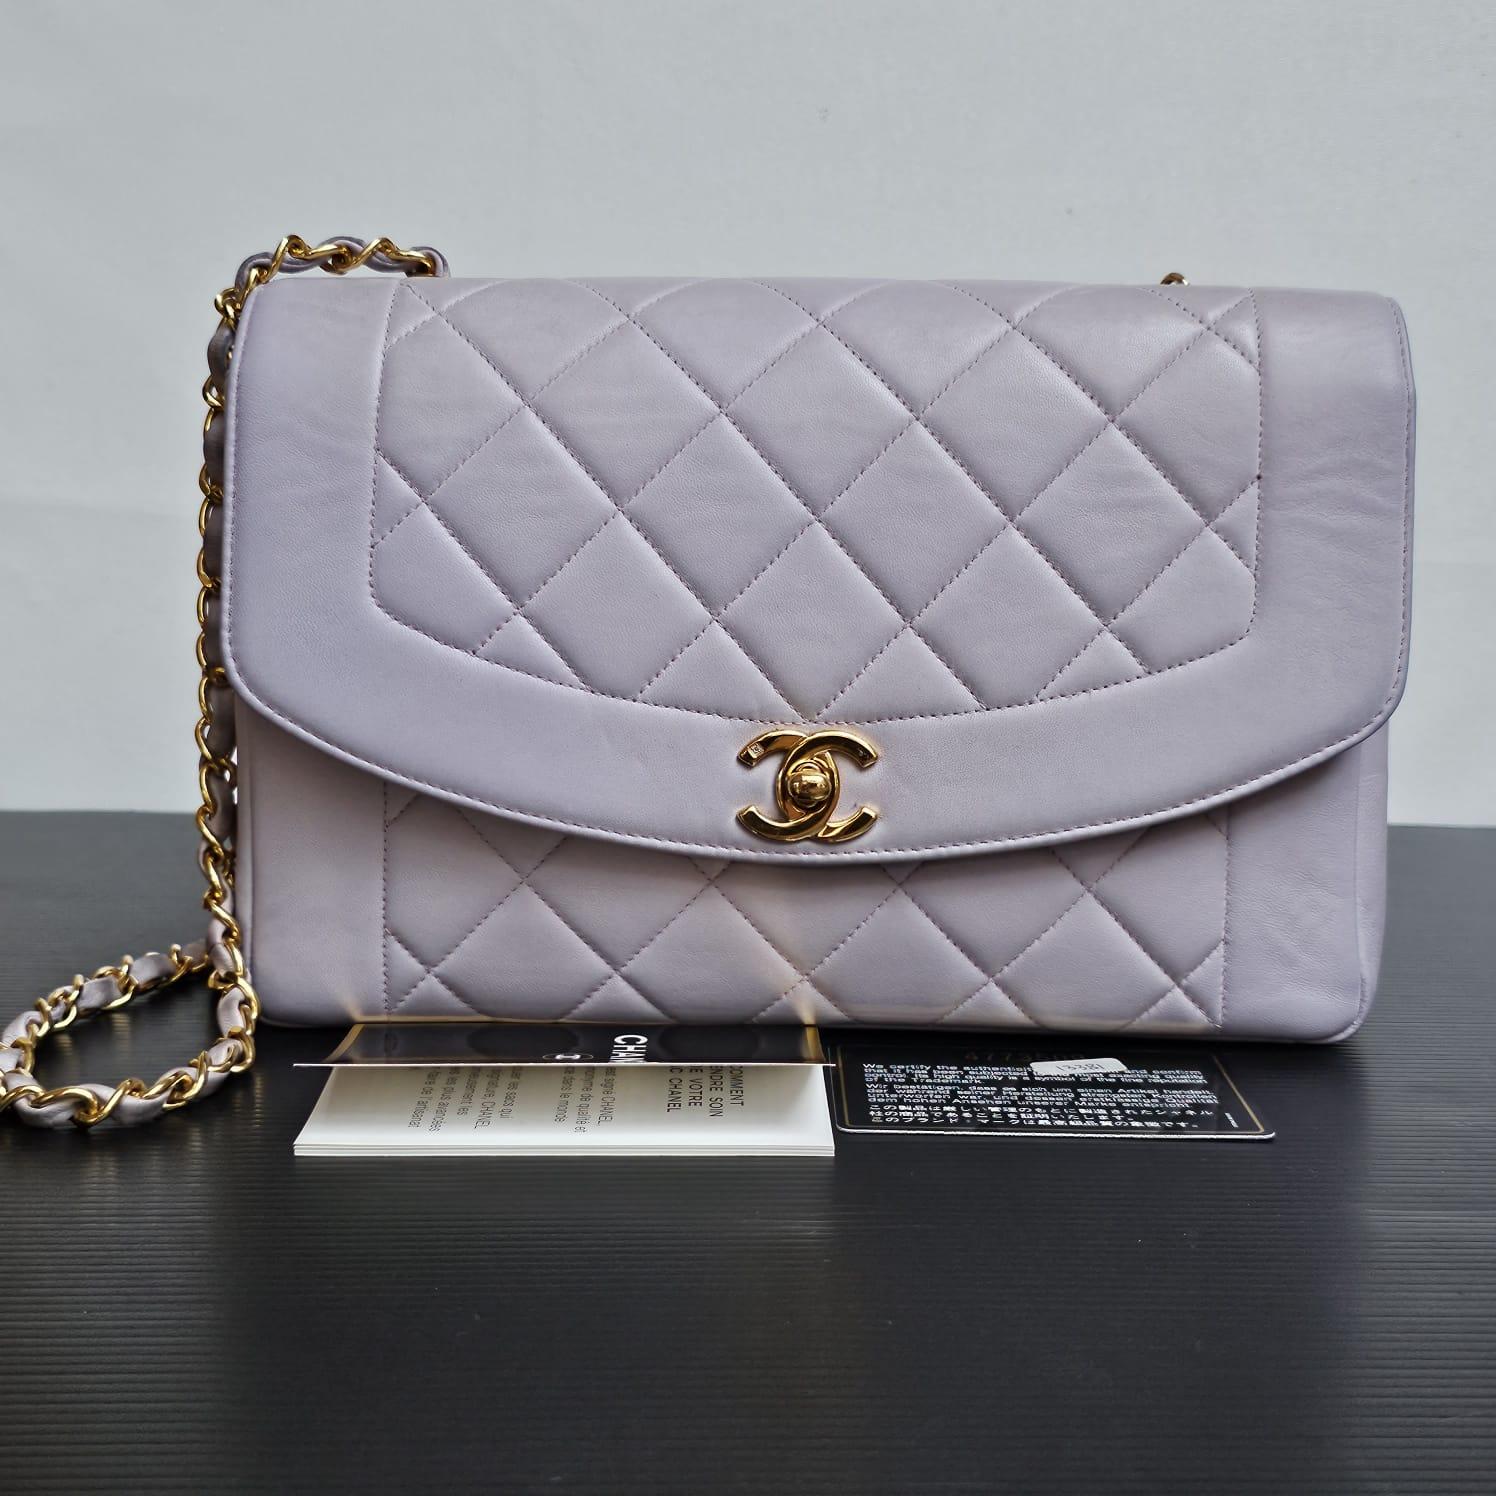 Rare Vintage Chanel Medium Lilac Lambskin Quilted Diana Flap Bag 2